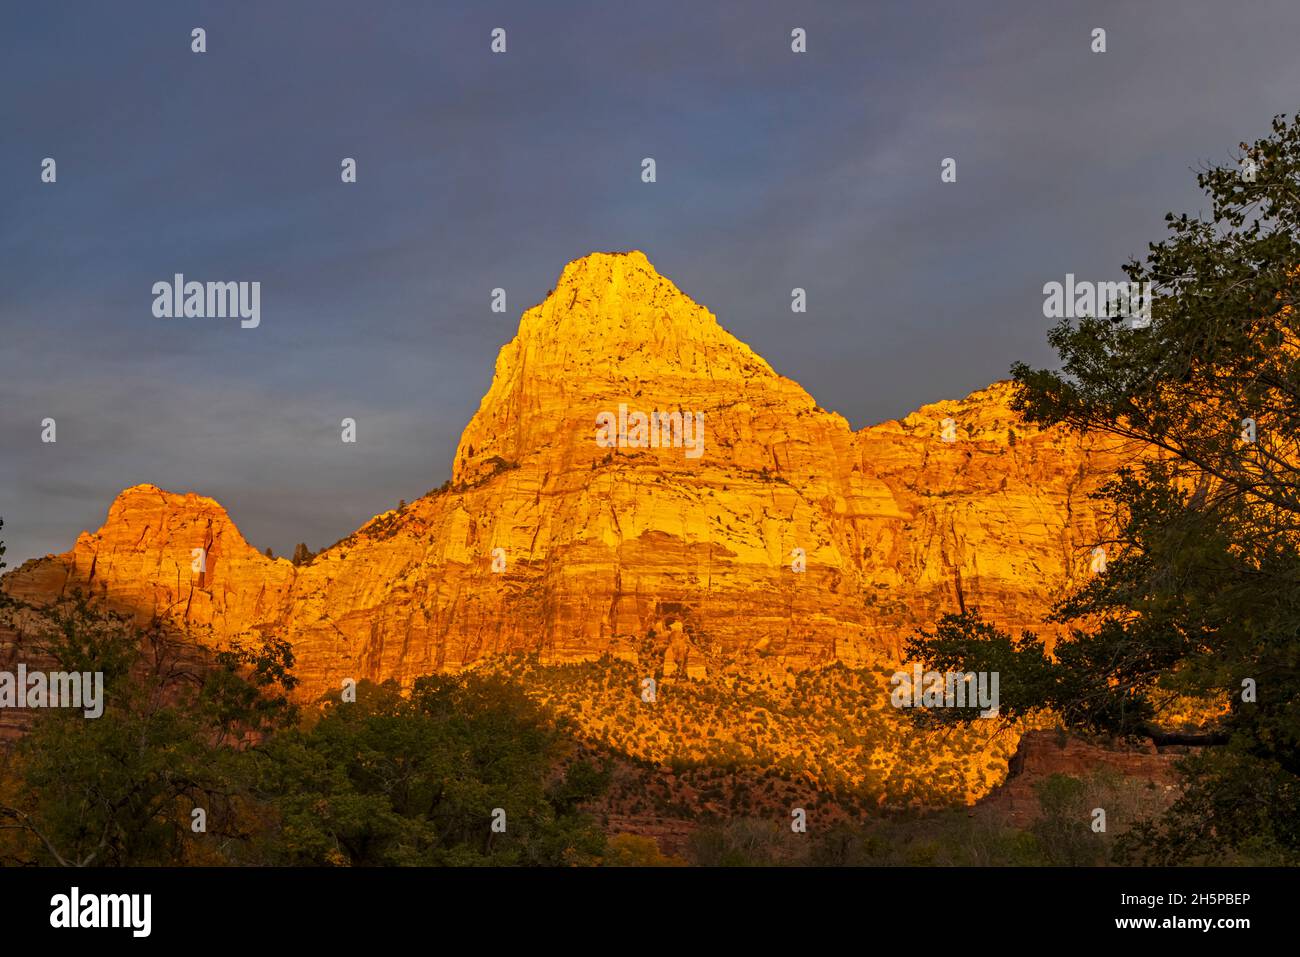 This is a view of Bridge Mountain in the warm light of the setting sun in Zion National Park, Springdale, Washington County, Utah, USA. Stock Photo